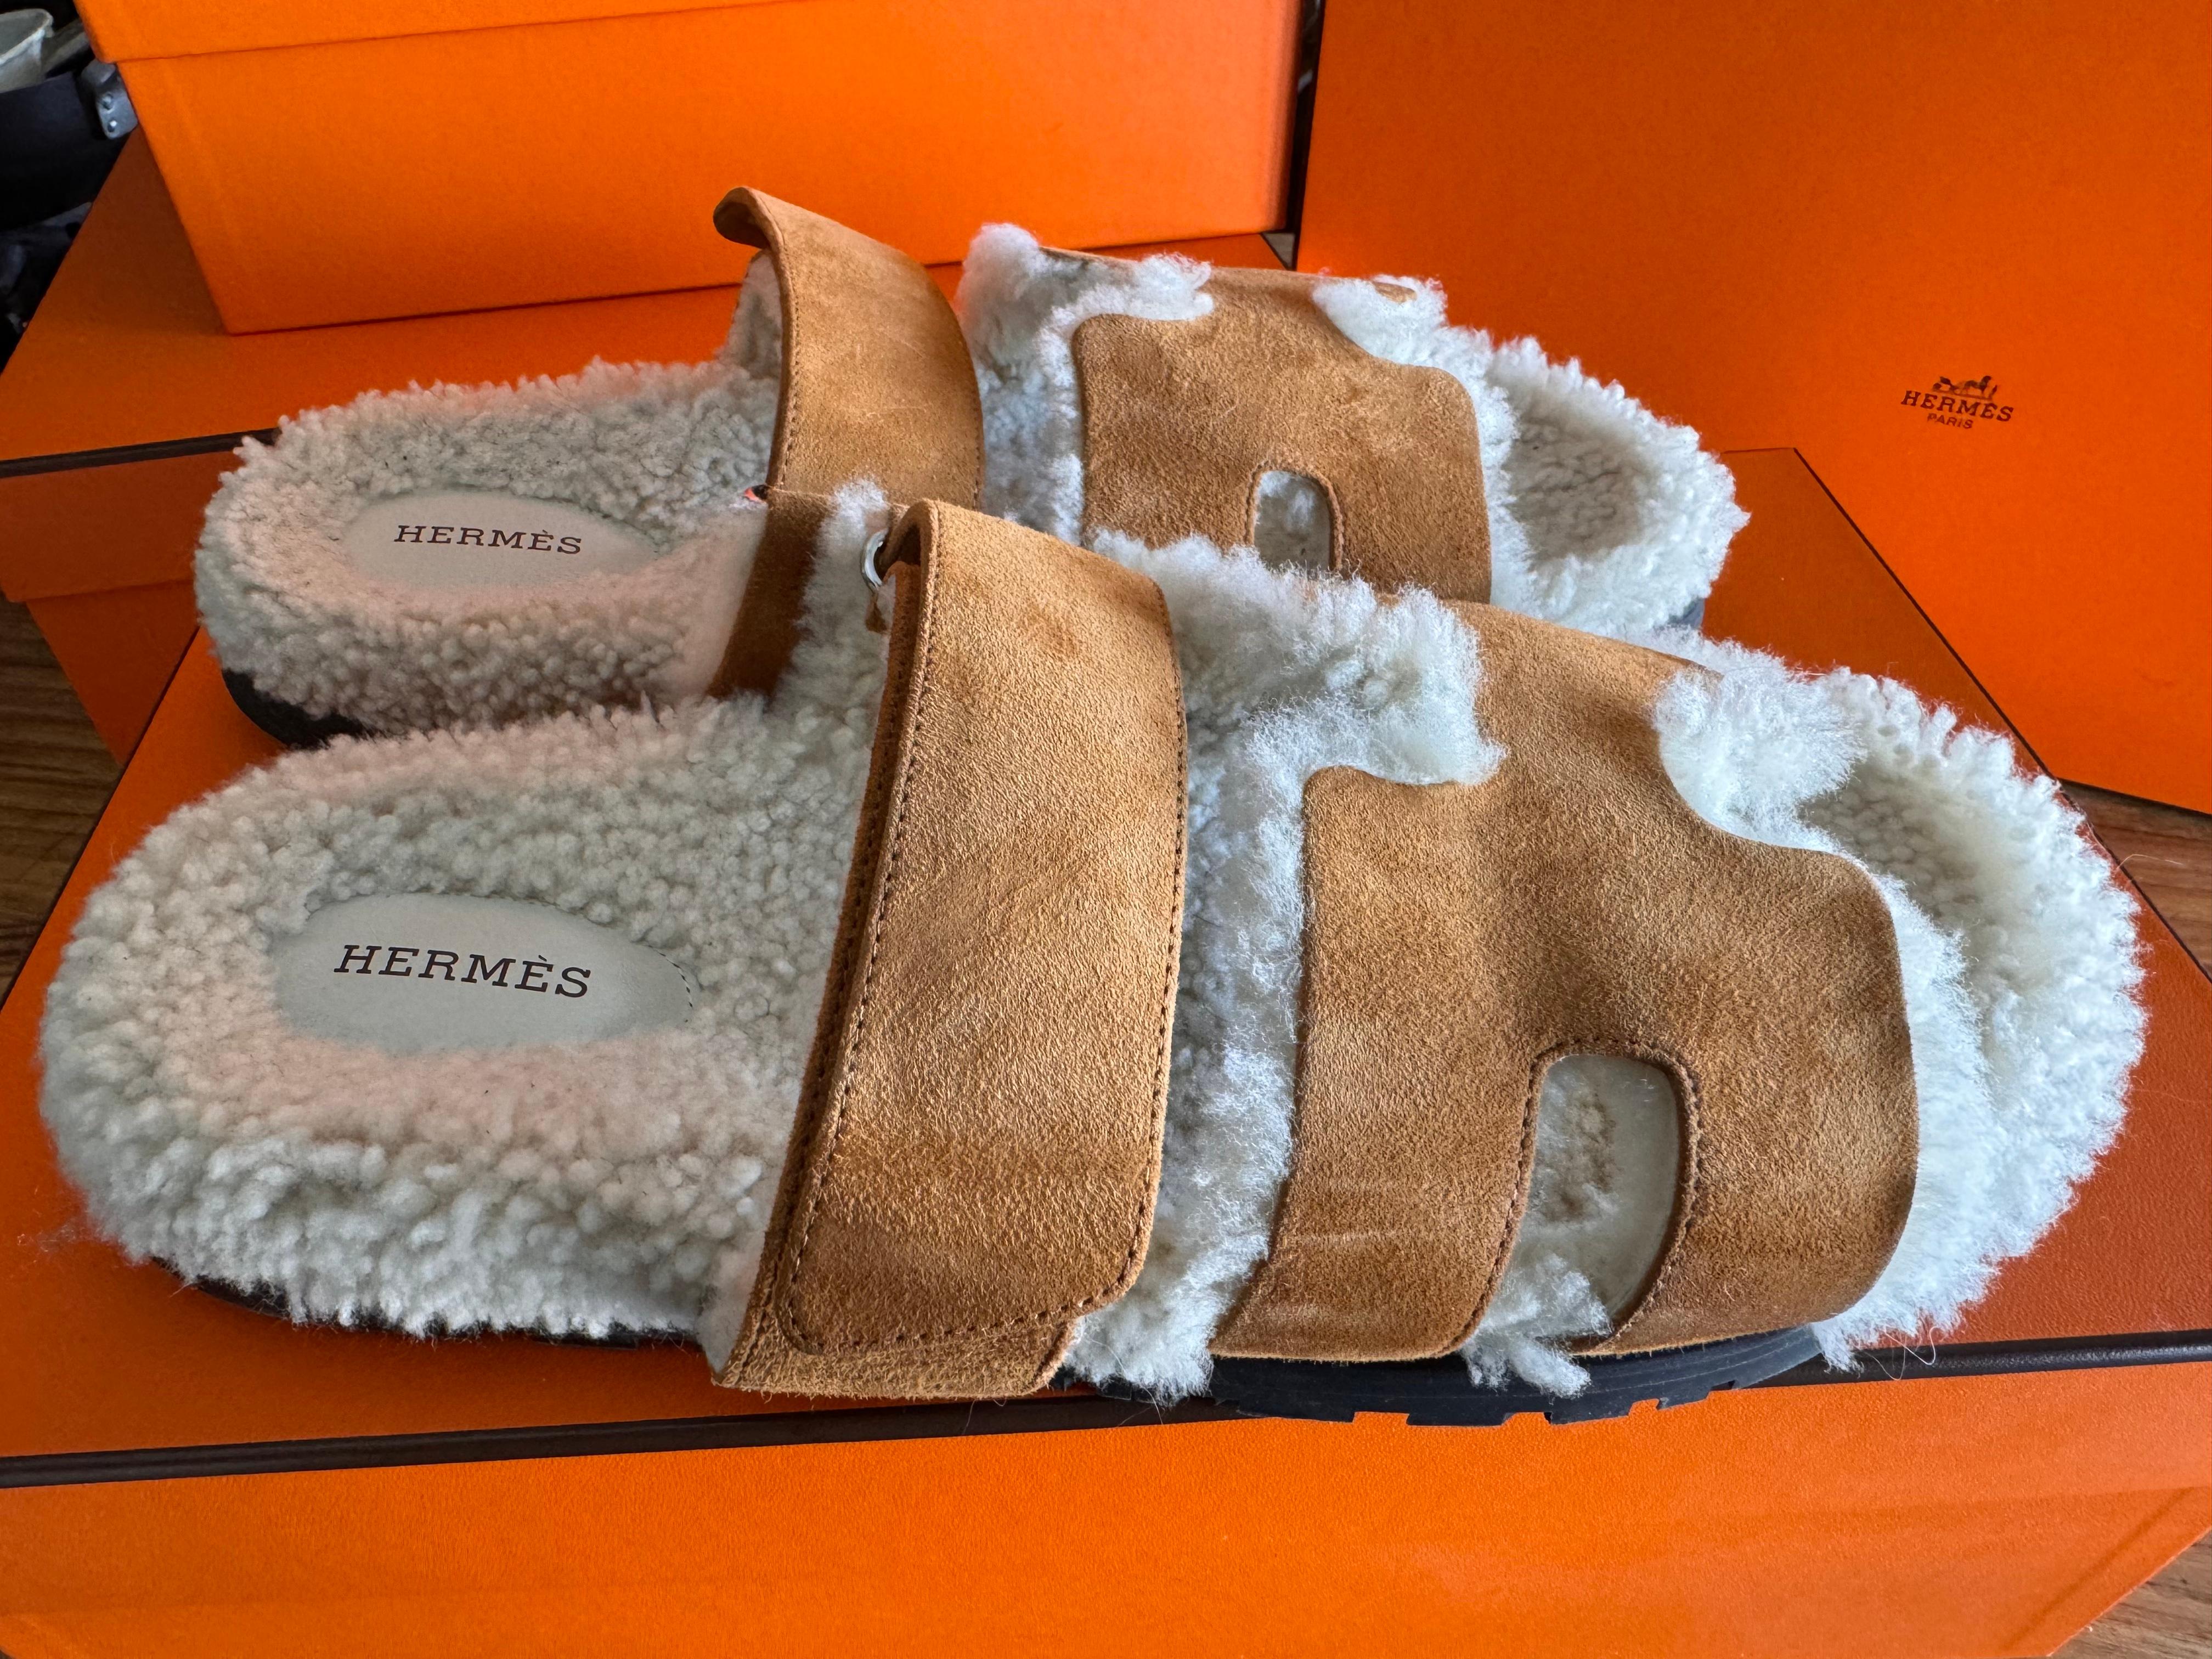 The Hermes shearling sandal in size 41 is not only a practical choice for those seeking comfort and warmth, but it also serves as a bold fashion statement piece in current trends. Crafted from premium shearling material, these sandals exude luxury